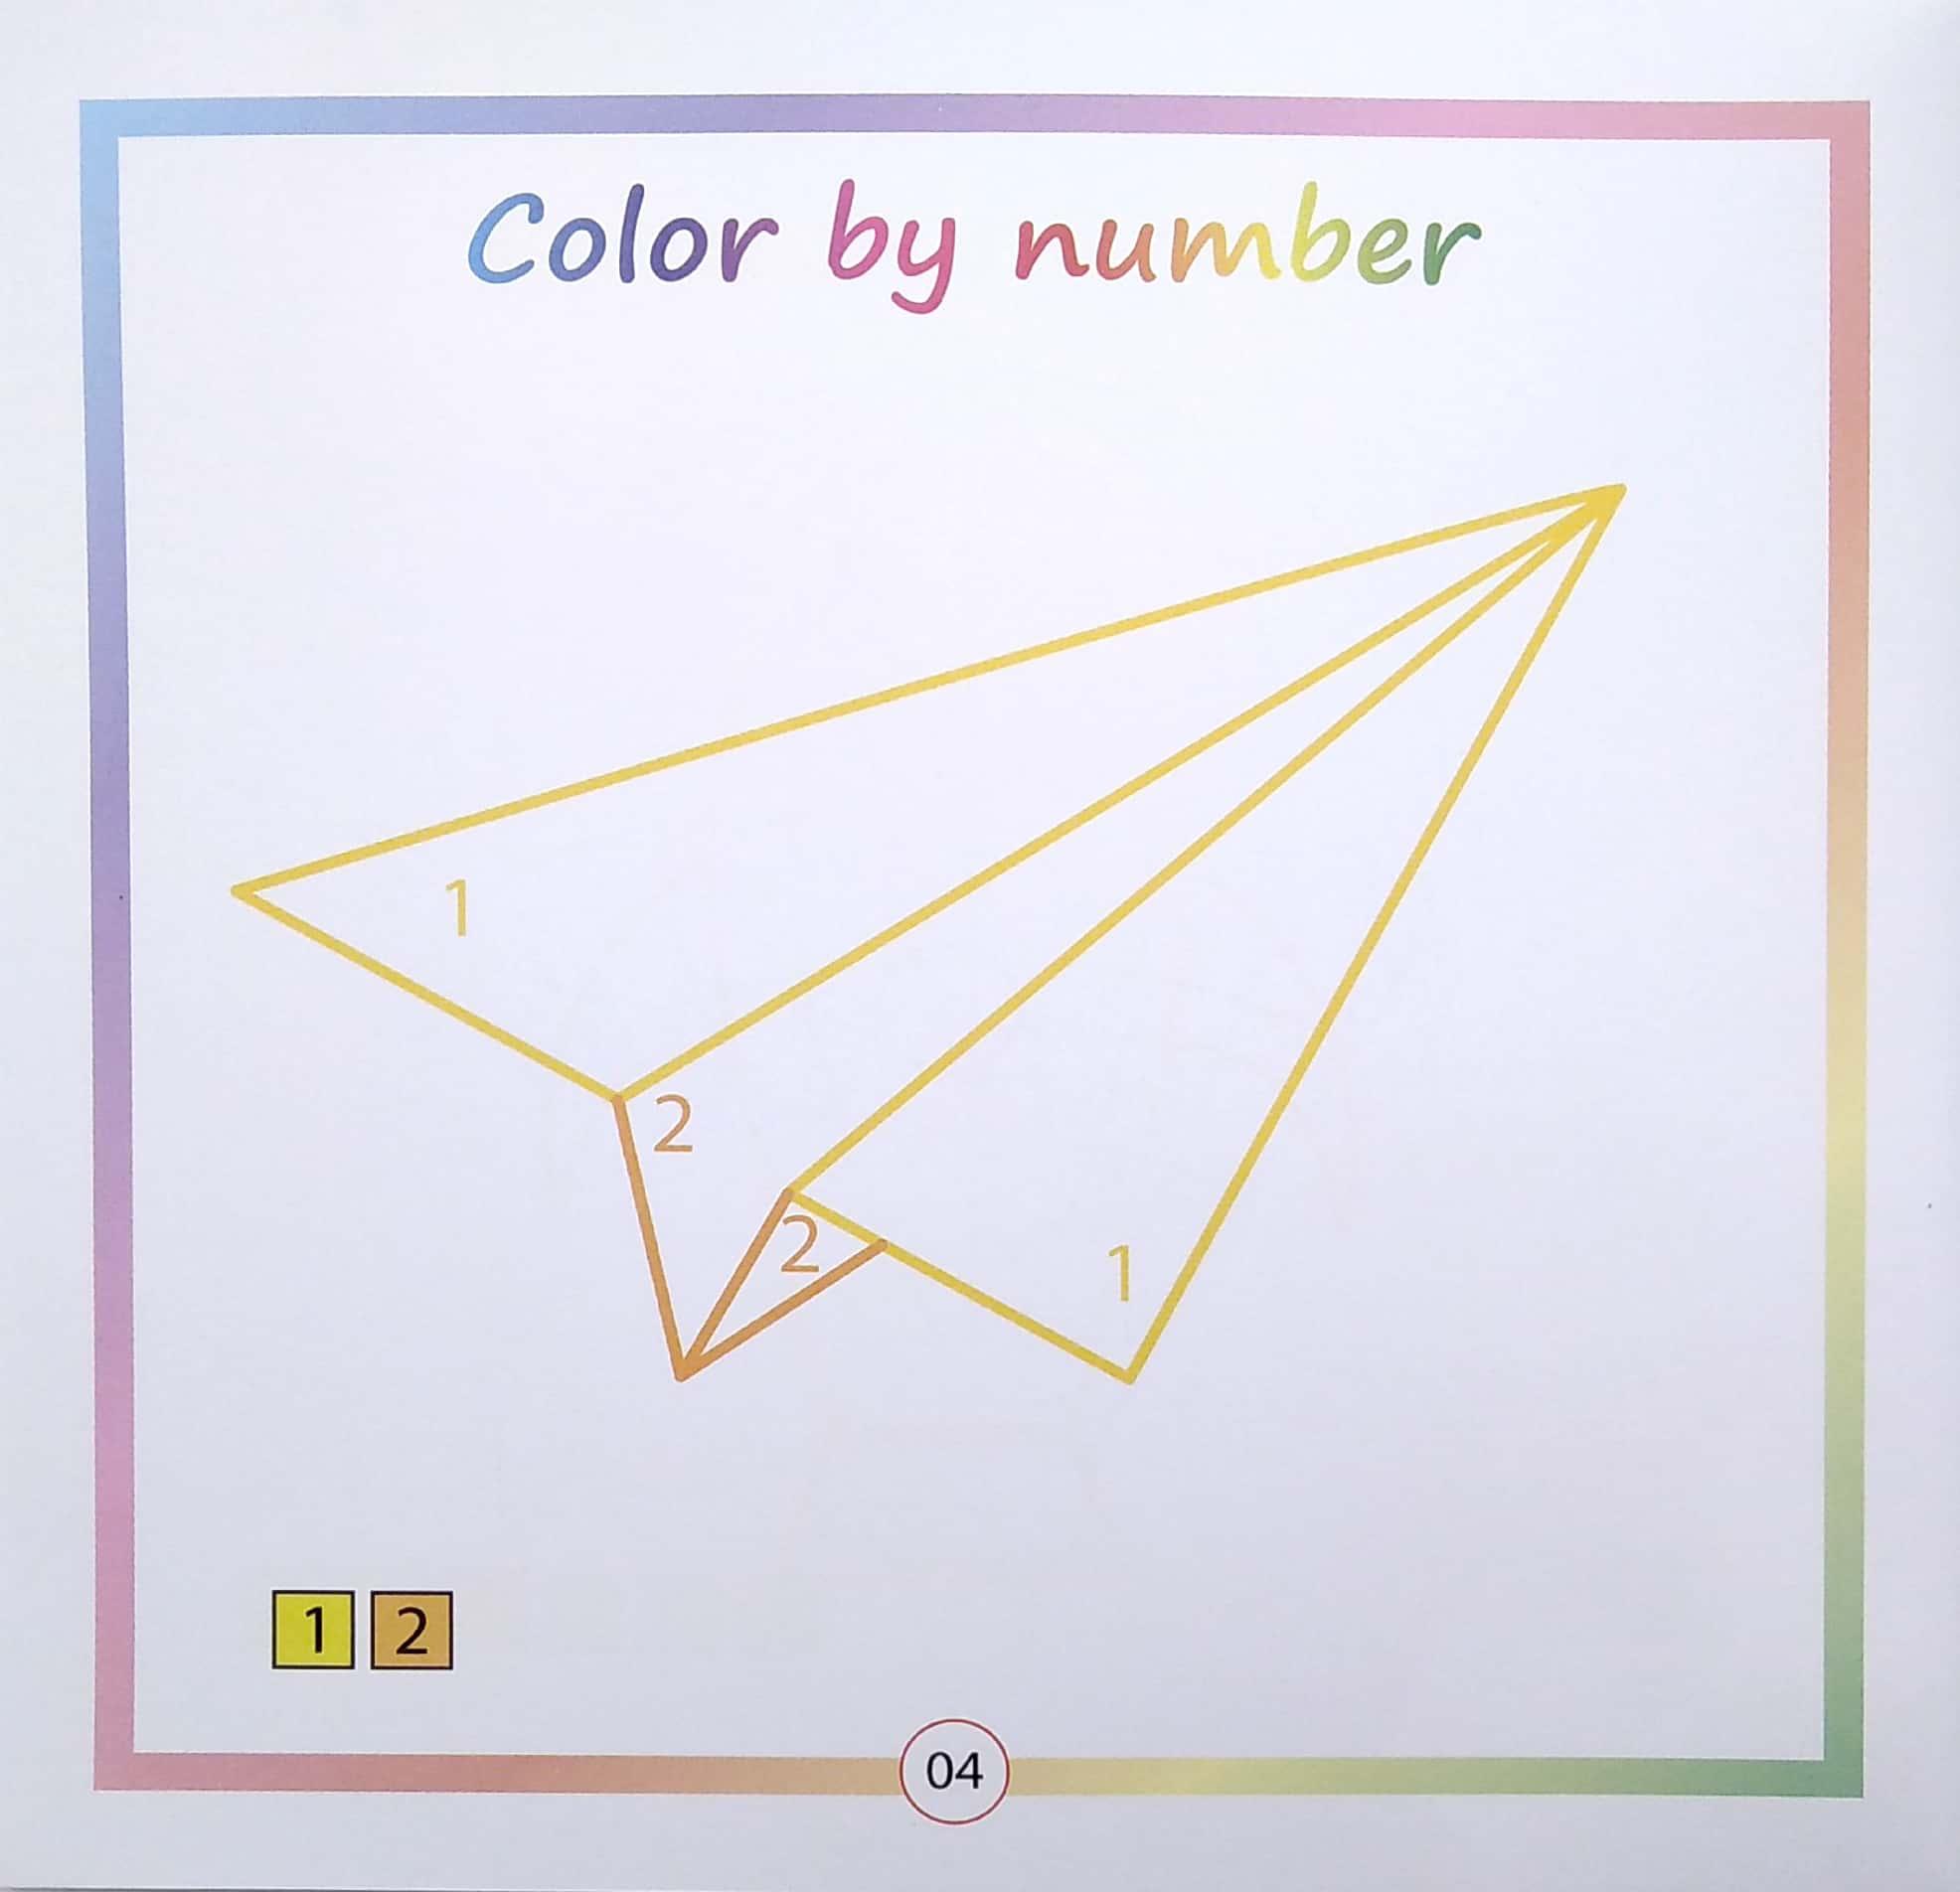 Color By Number - Tô Màu Theo Số -Tập 5